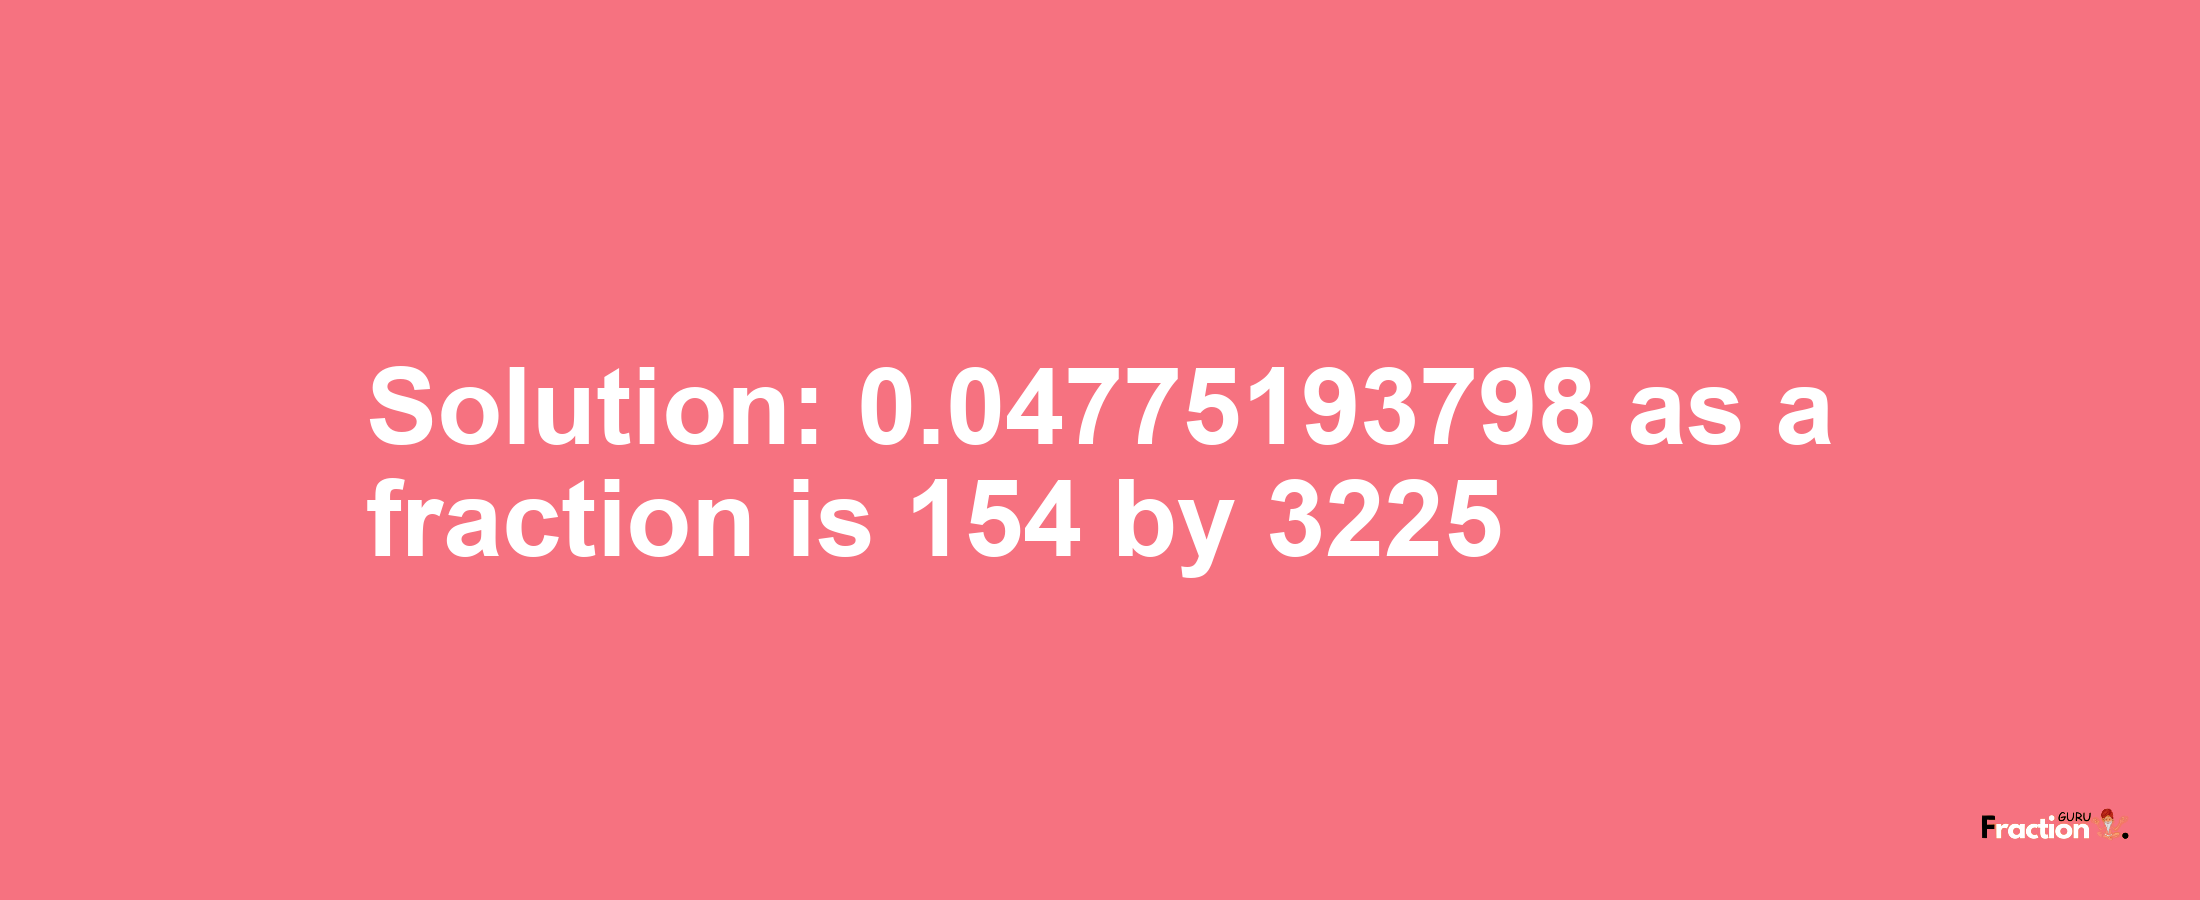 Solution:0.04775193798 as a fraction is 154/3225